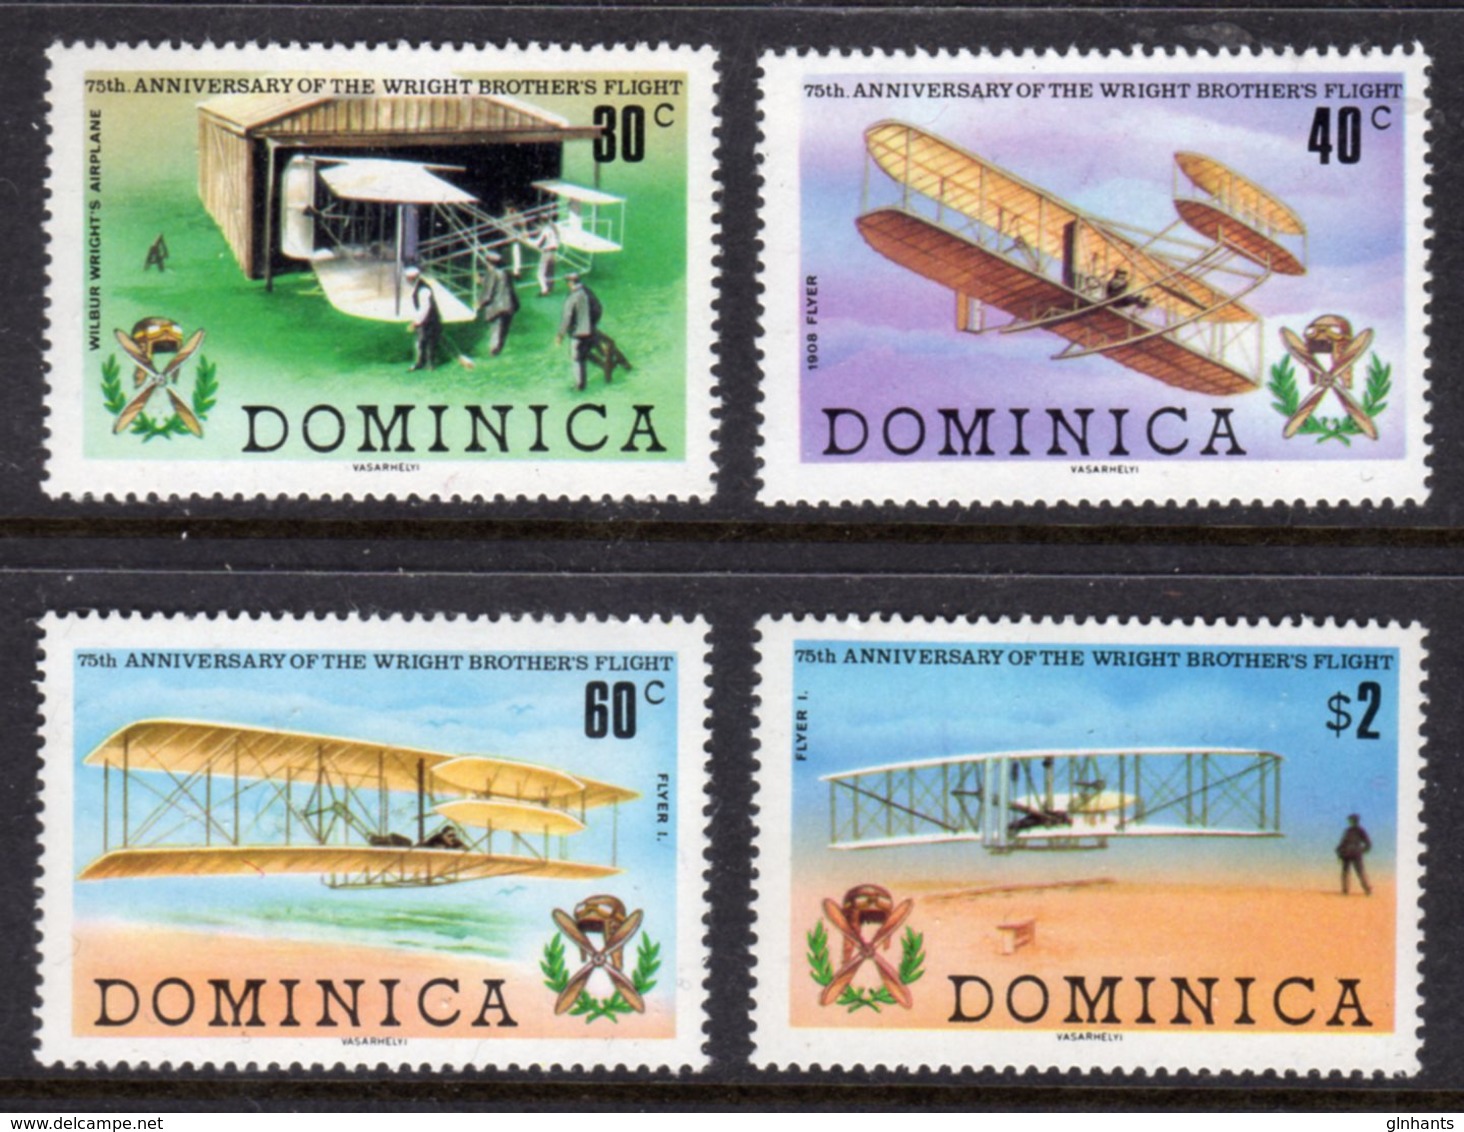 DOMINICA - 1978 WRIGHT BROTHERS POWERED FLIGHT ANNIVERSARY SET (4V) FINE MNH ** SG616-619 - Dominica (...-1978)